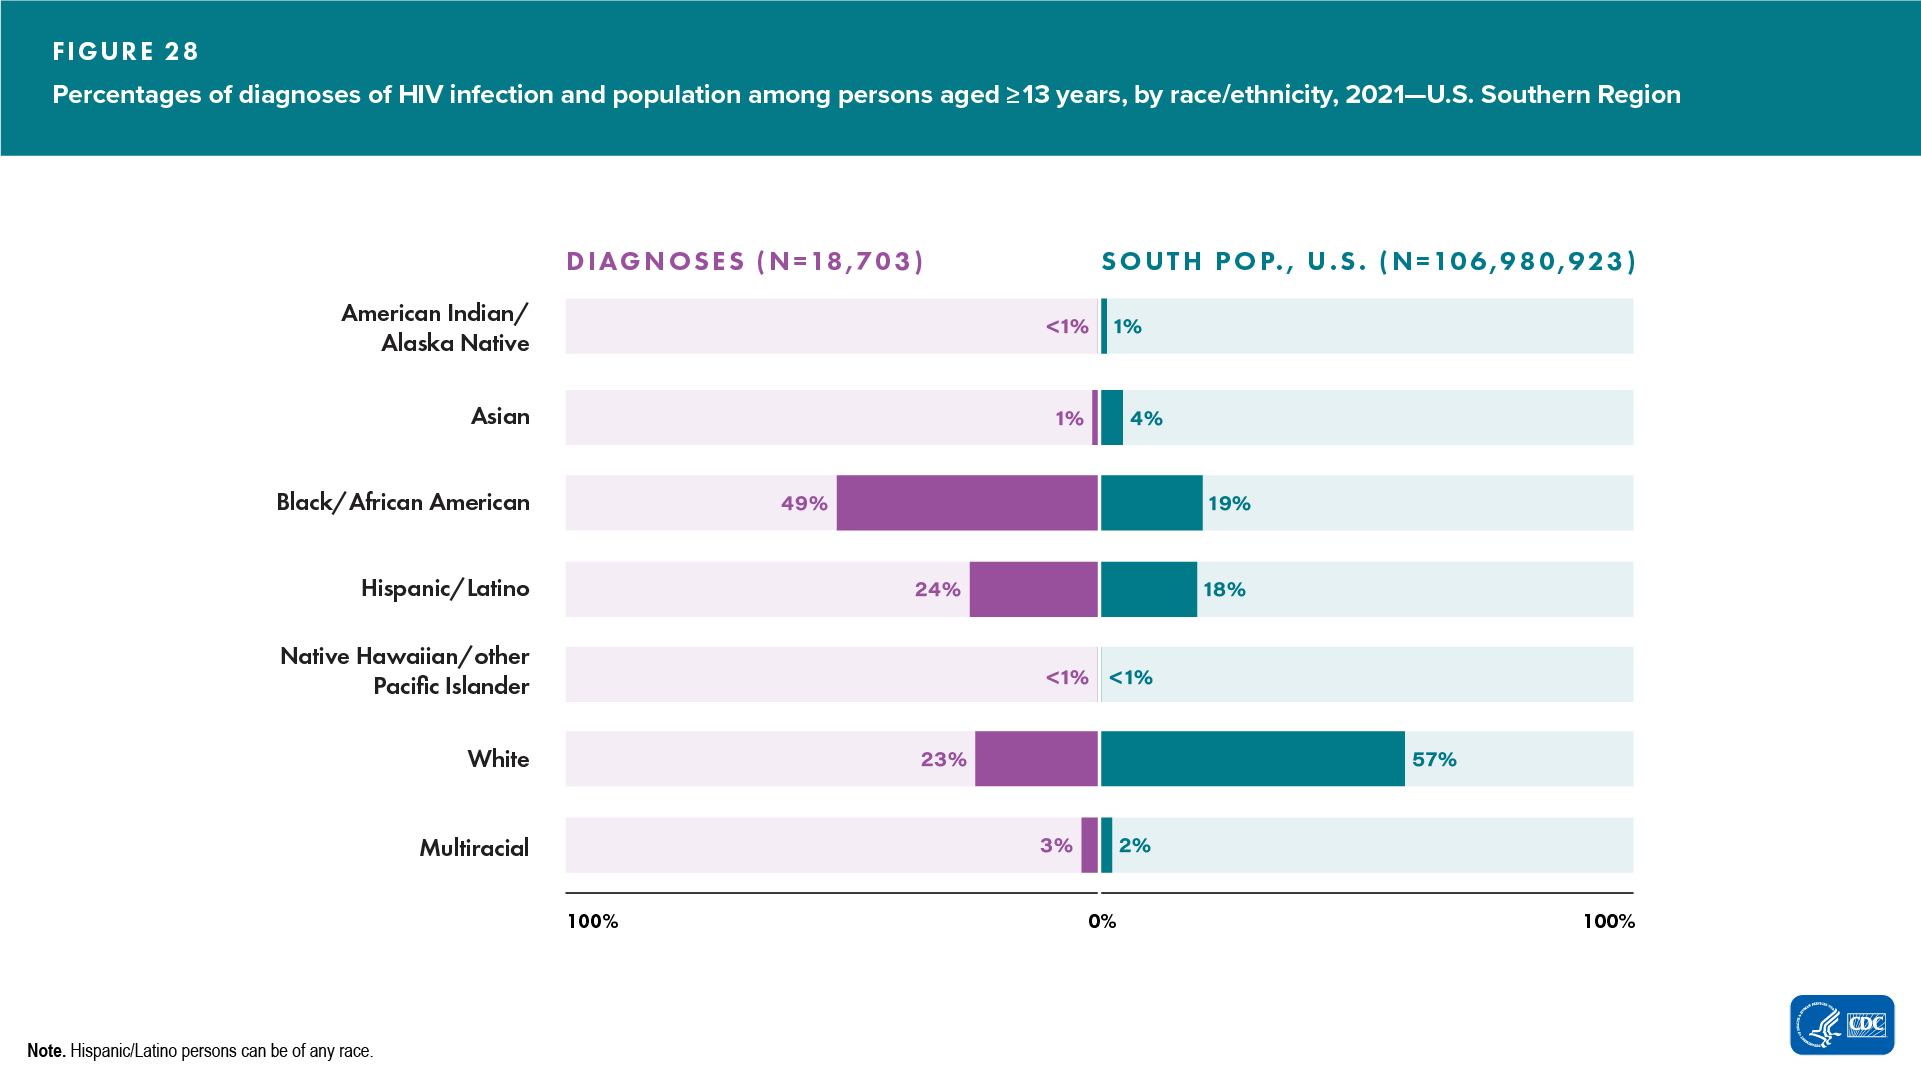 In 2021, Black/African American persons aged ≥ 13 years made up 19% of the South population, but HIV infection among this group accounted for 49% of diagnoses. White persons aged ≥ 13 years made up 57% of the South population, but HIV infection among this group accounted for 23% of diagnoses. Hispanic/Latino persons aged ≥ 13 years made up 18% of the South population, but HIV infection among this group accounted for 24% of diagnoses.